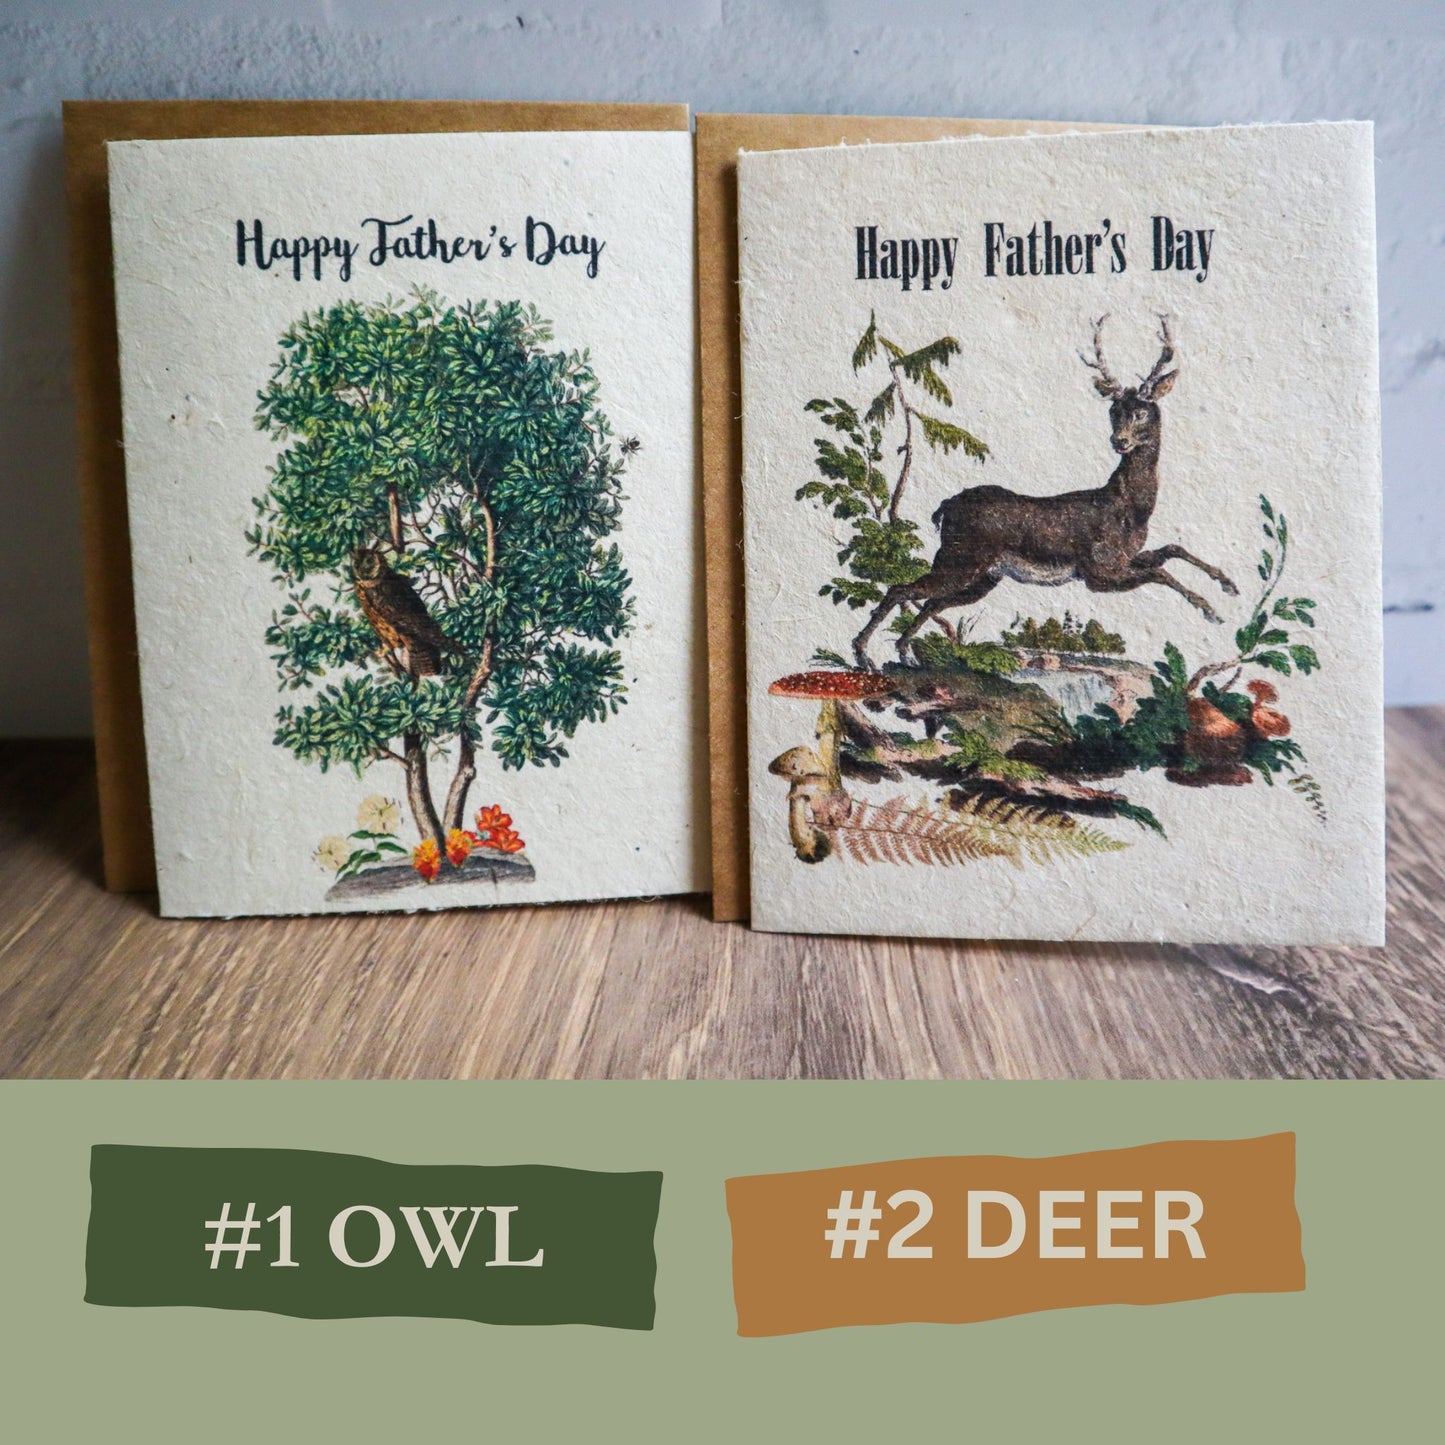 father's day plantable cards printed on flower seed paper with owl or deer design